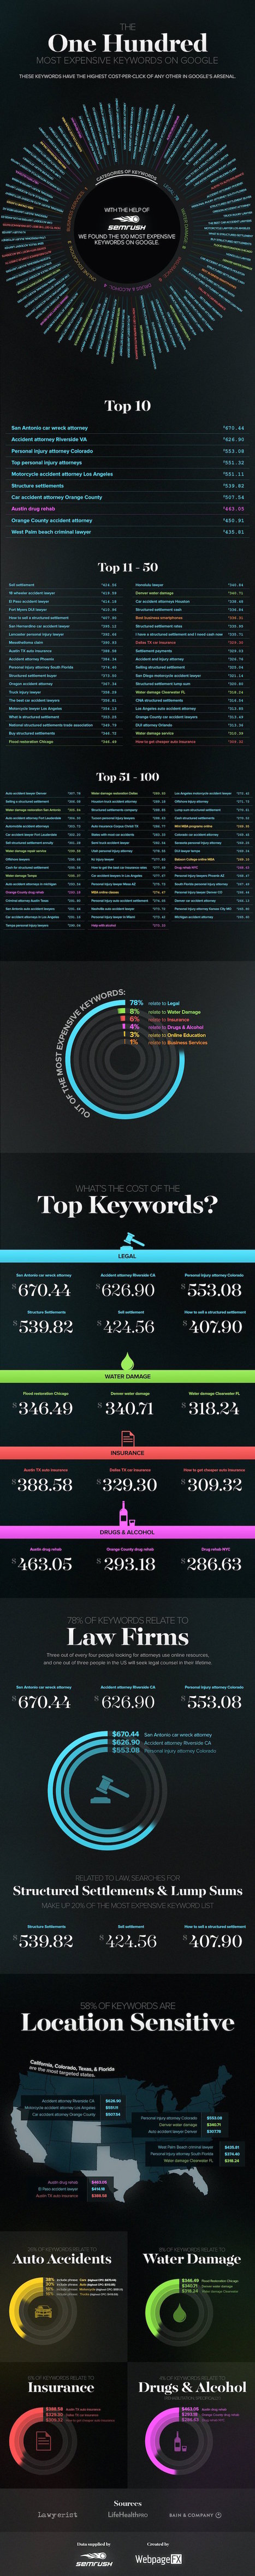 The 100 Most Expensive Keywords on Google #Infographic | e-commerce & social media | Scoop.it